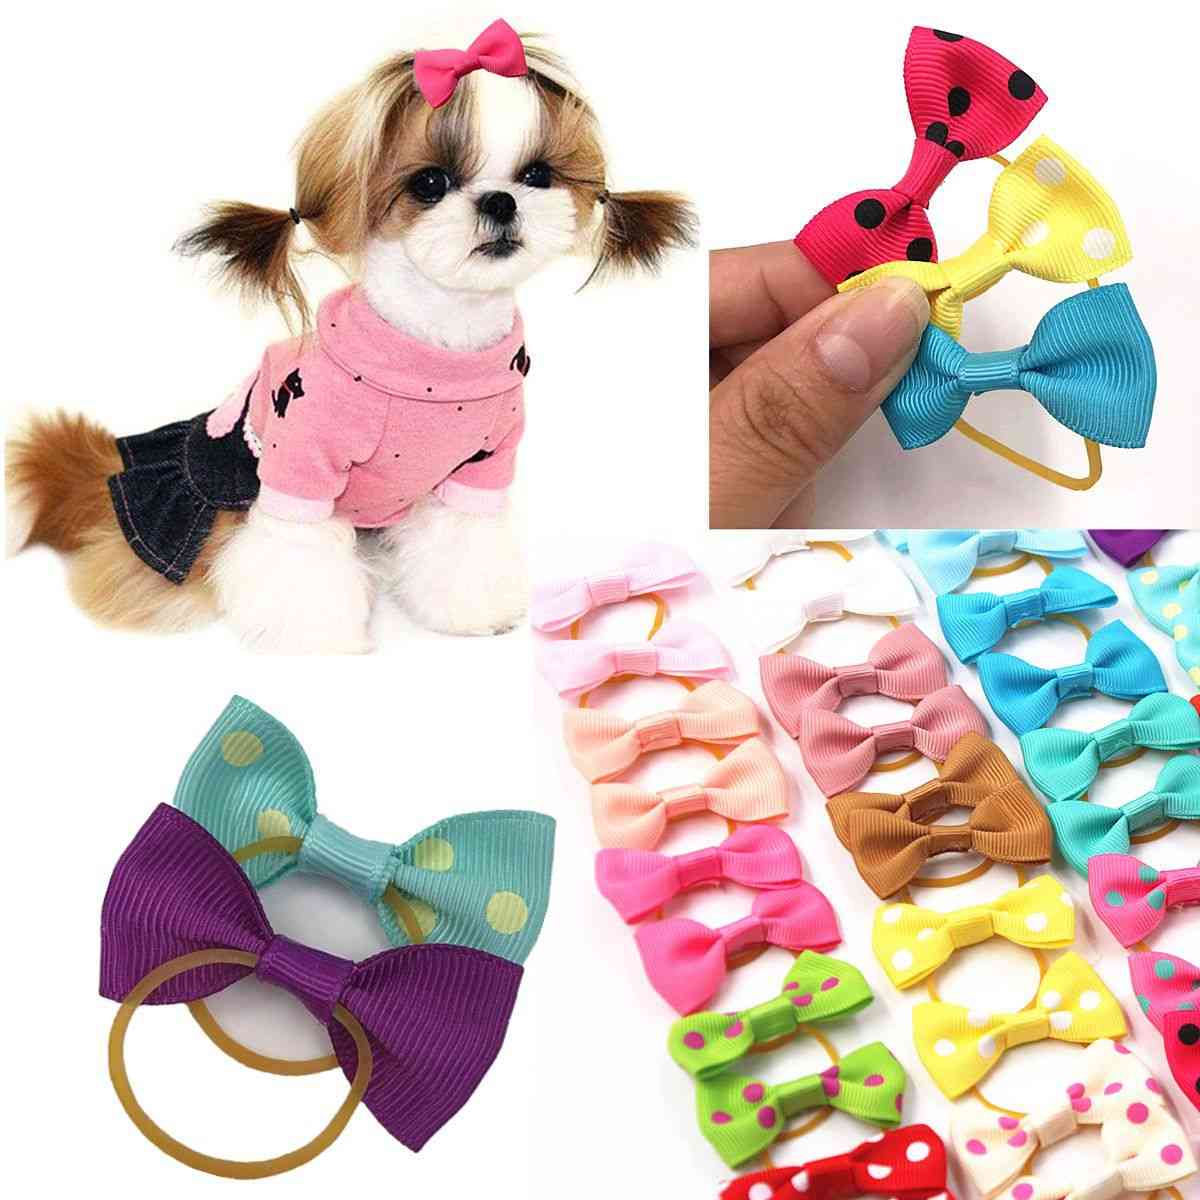 10pcs Handmade Cute Pet Dog Bow Loverly Bowknot Dog Ties For Puppy Dogs Accessories With Rubber Bands Cute Pet Headwear Grooming